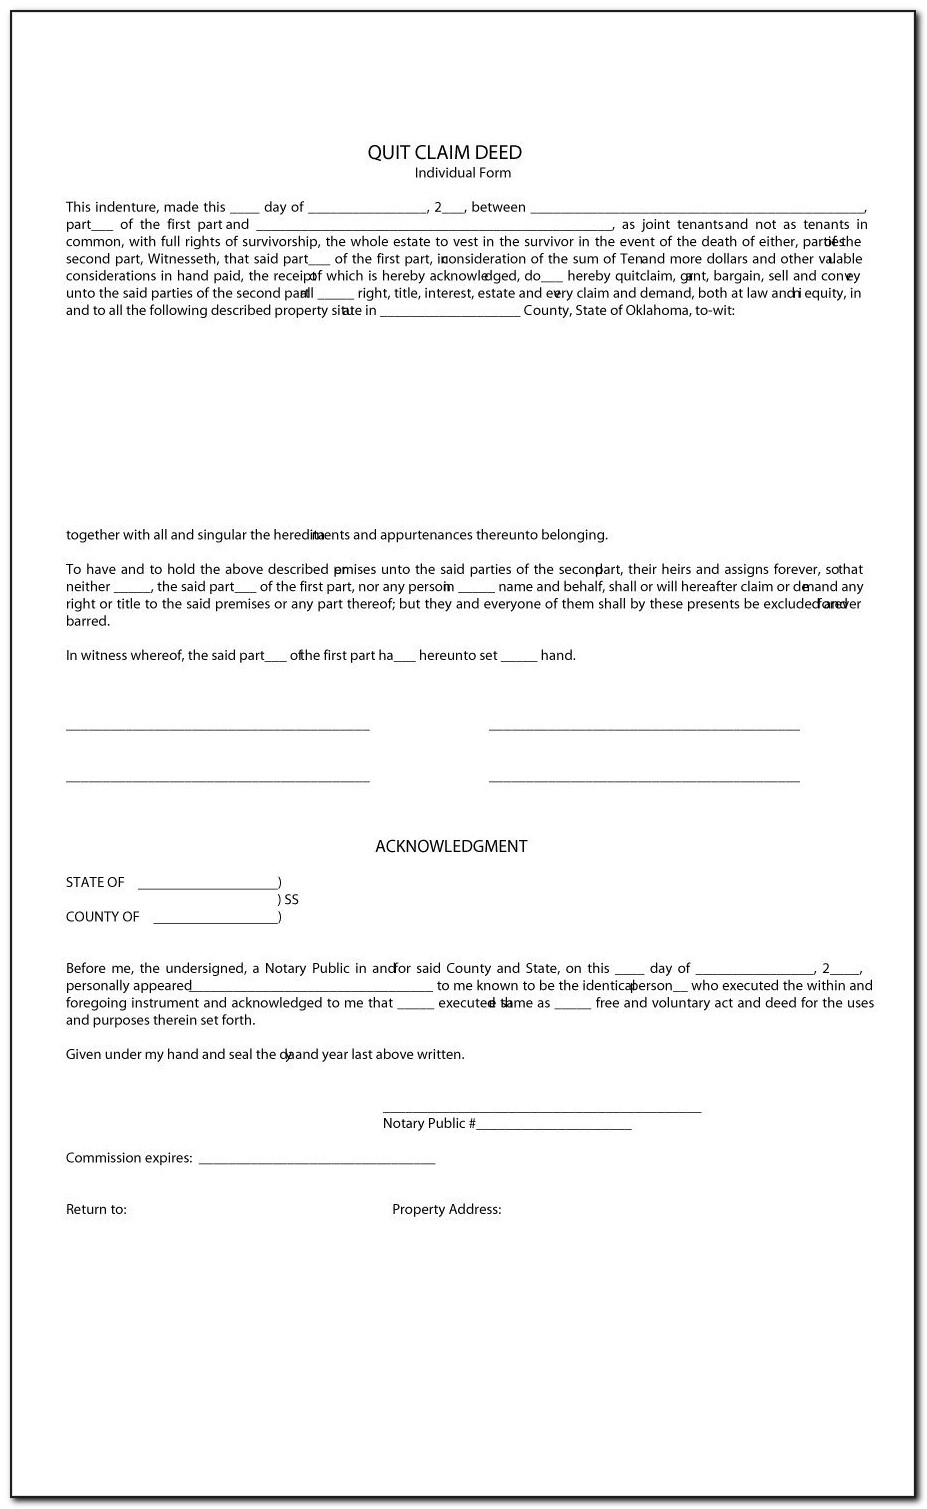 Quit Claim Deed Template Indiana